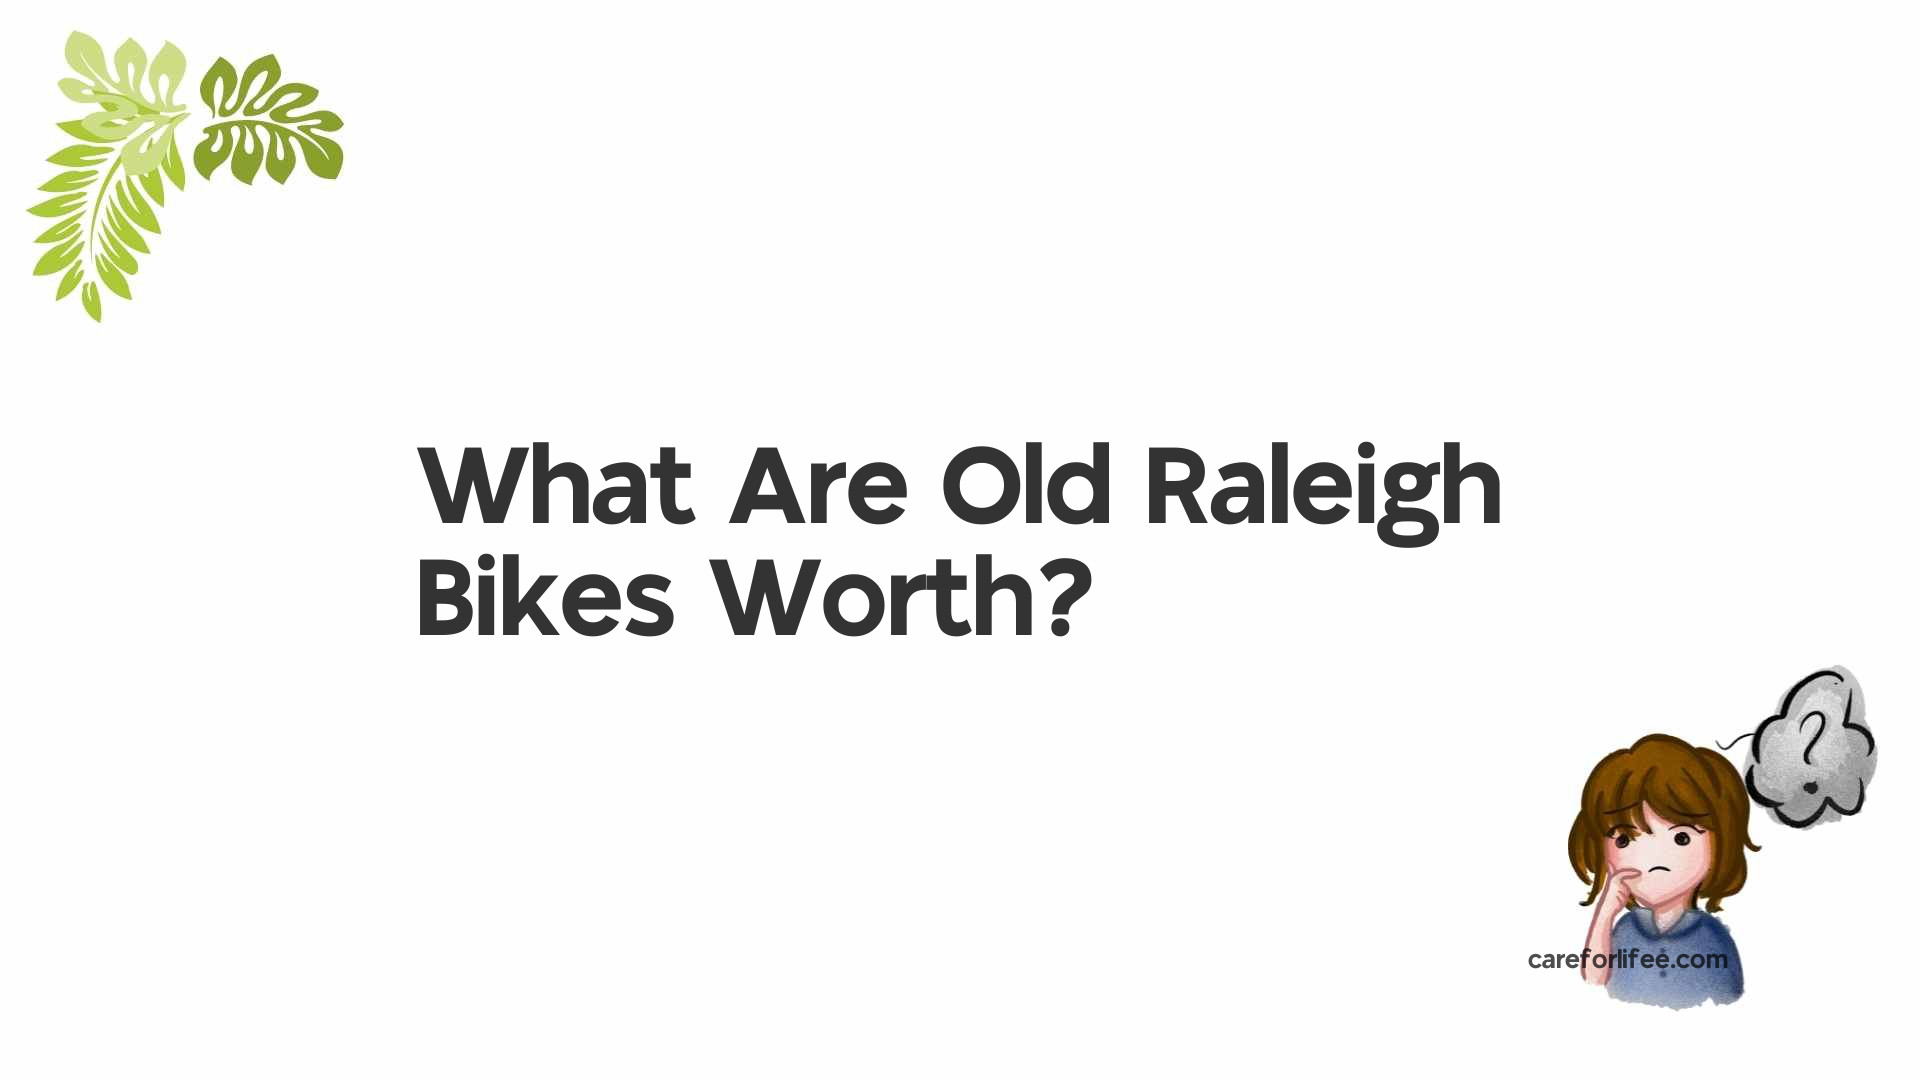 What Are Old Raleigh Bikes Worth?